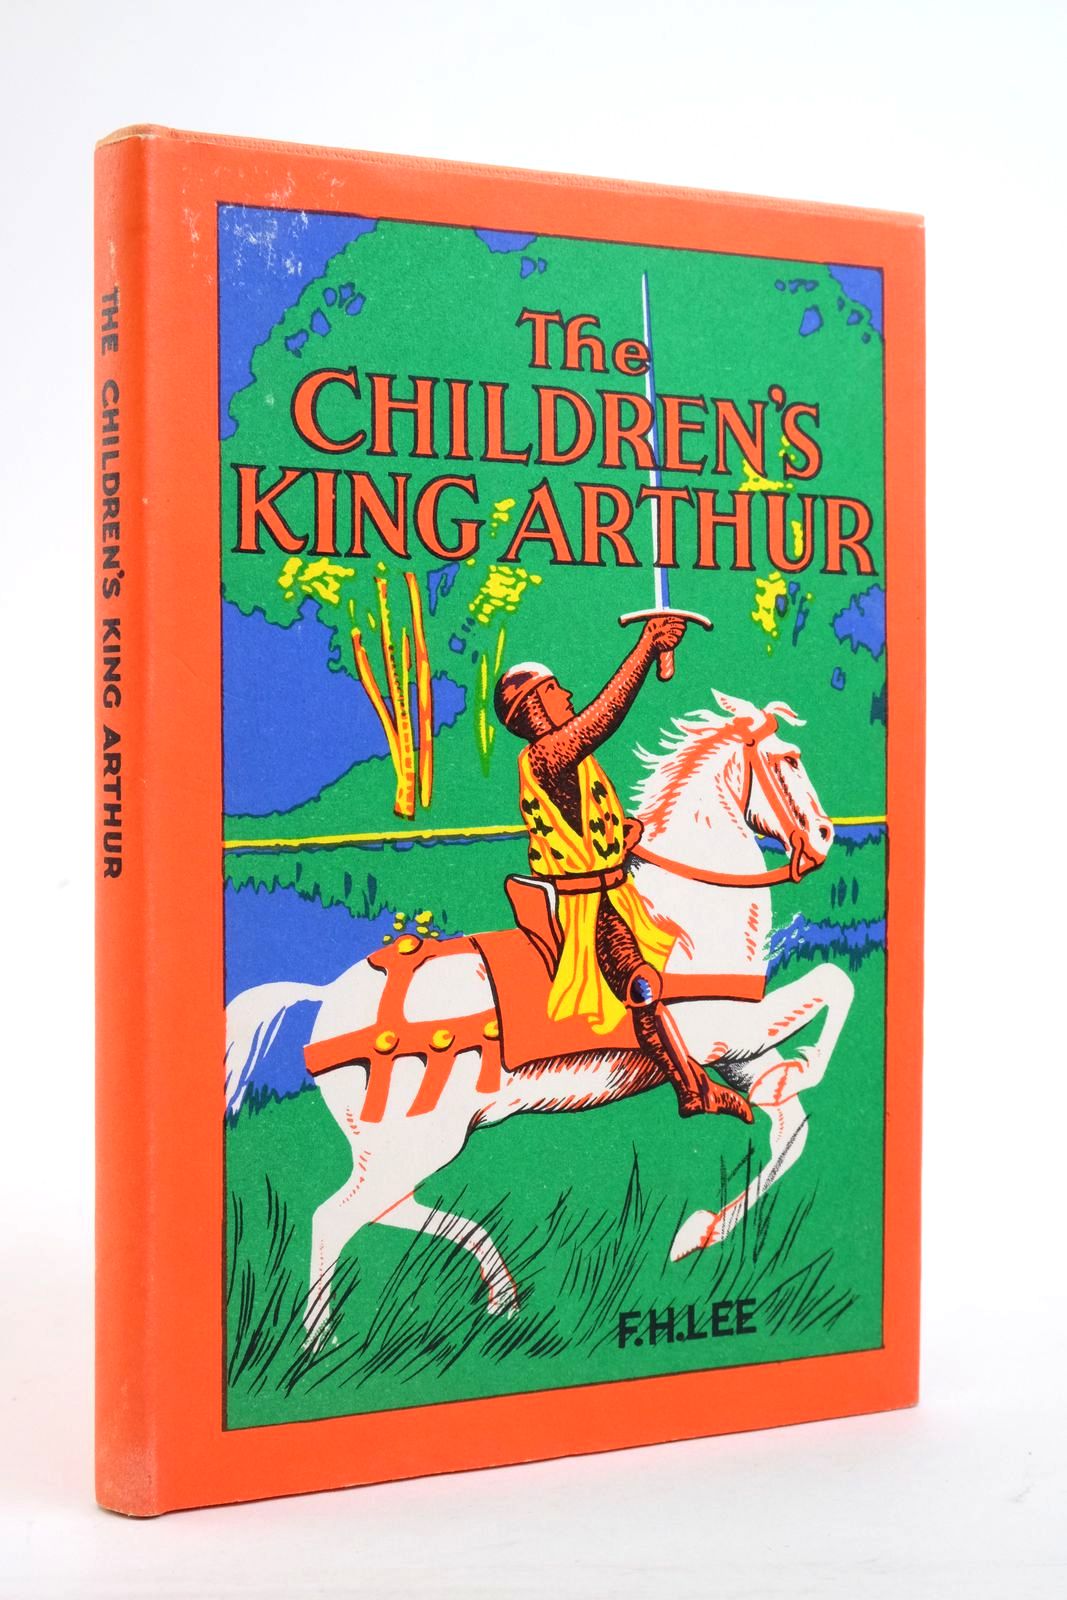 Photo of THE CHILDREN'S KING ARTHUR written by Lee, F.H. illustrated by Appleton, Honor C. published by George G. Harrap & Co. Ltd. (STOCK CODE: 2136291)  for sale by Stella & Rose's Books